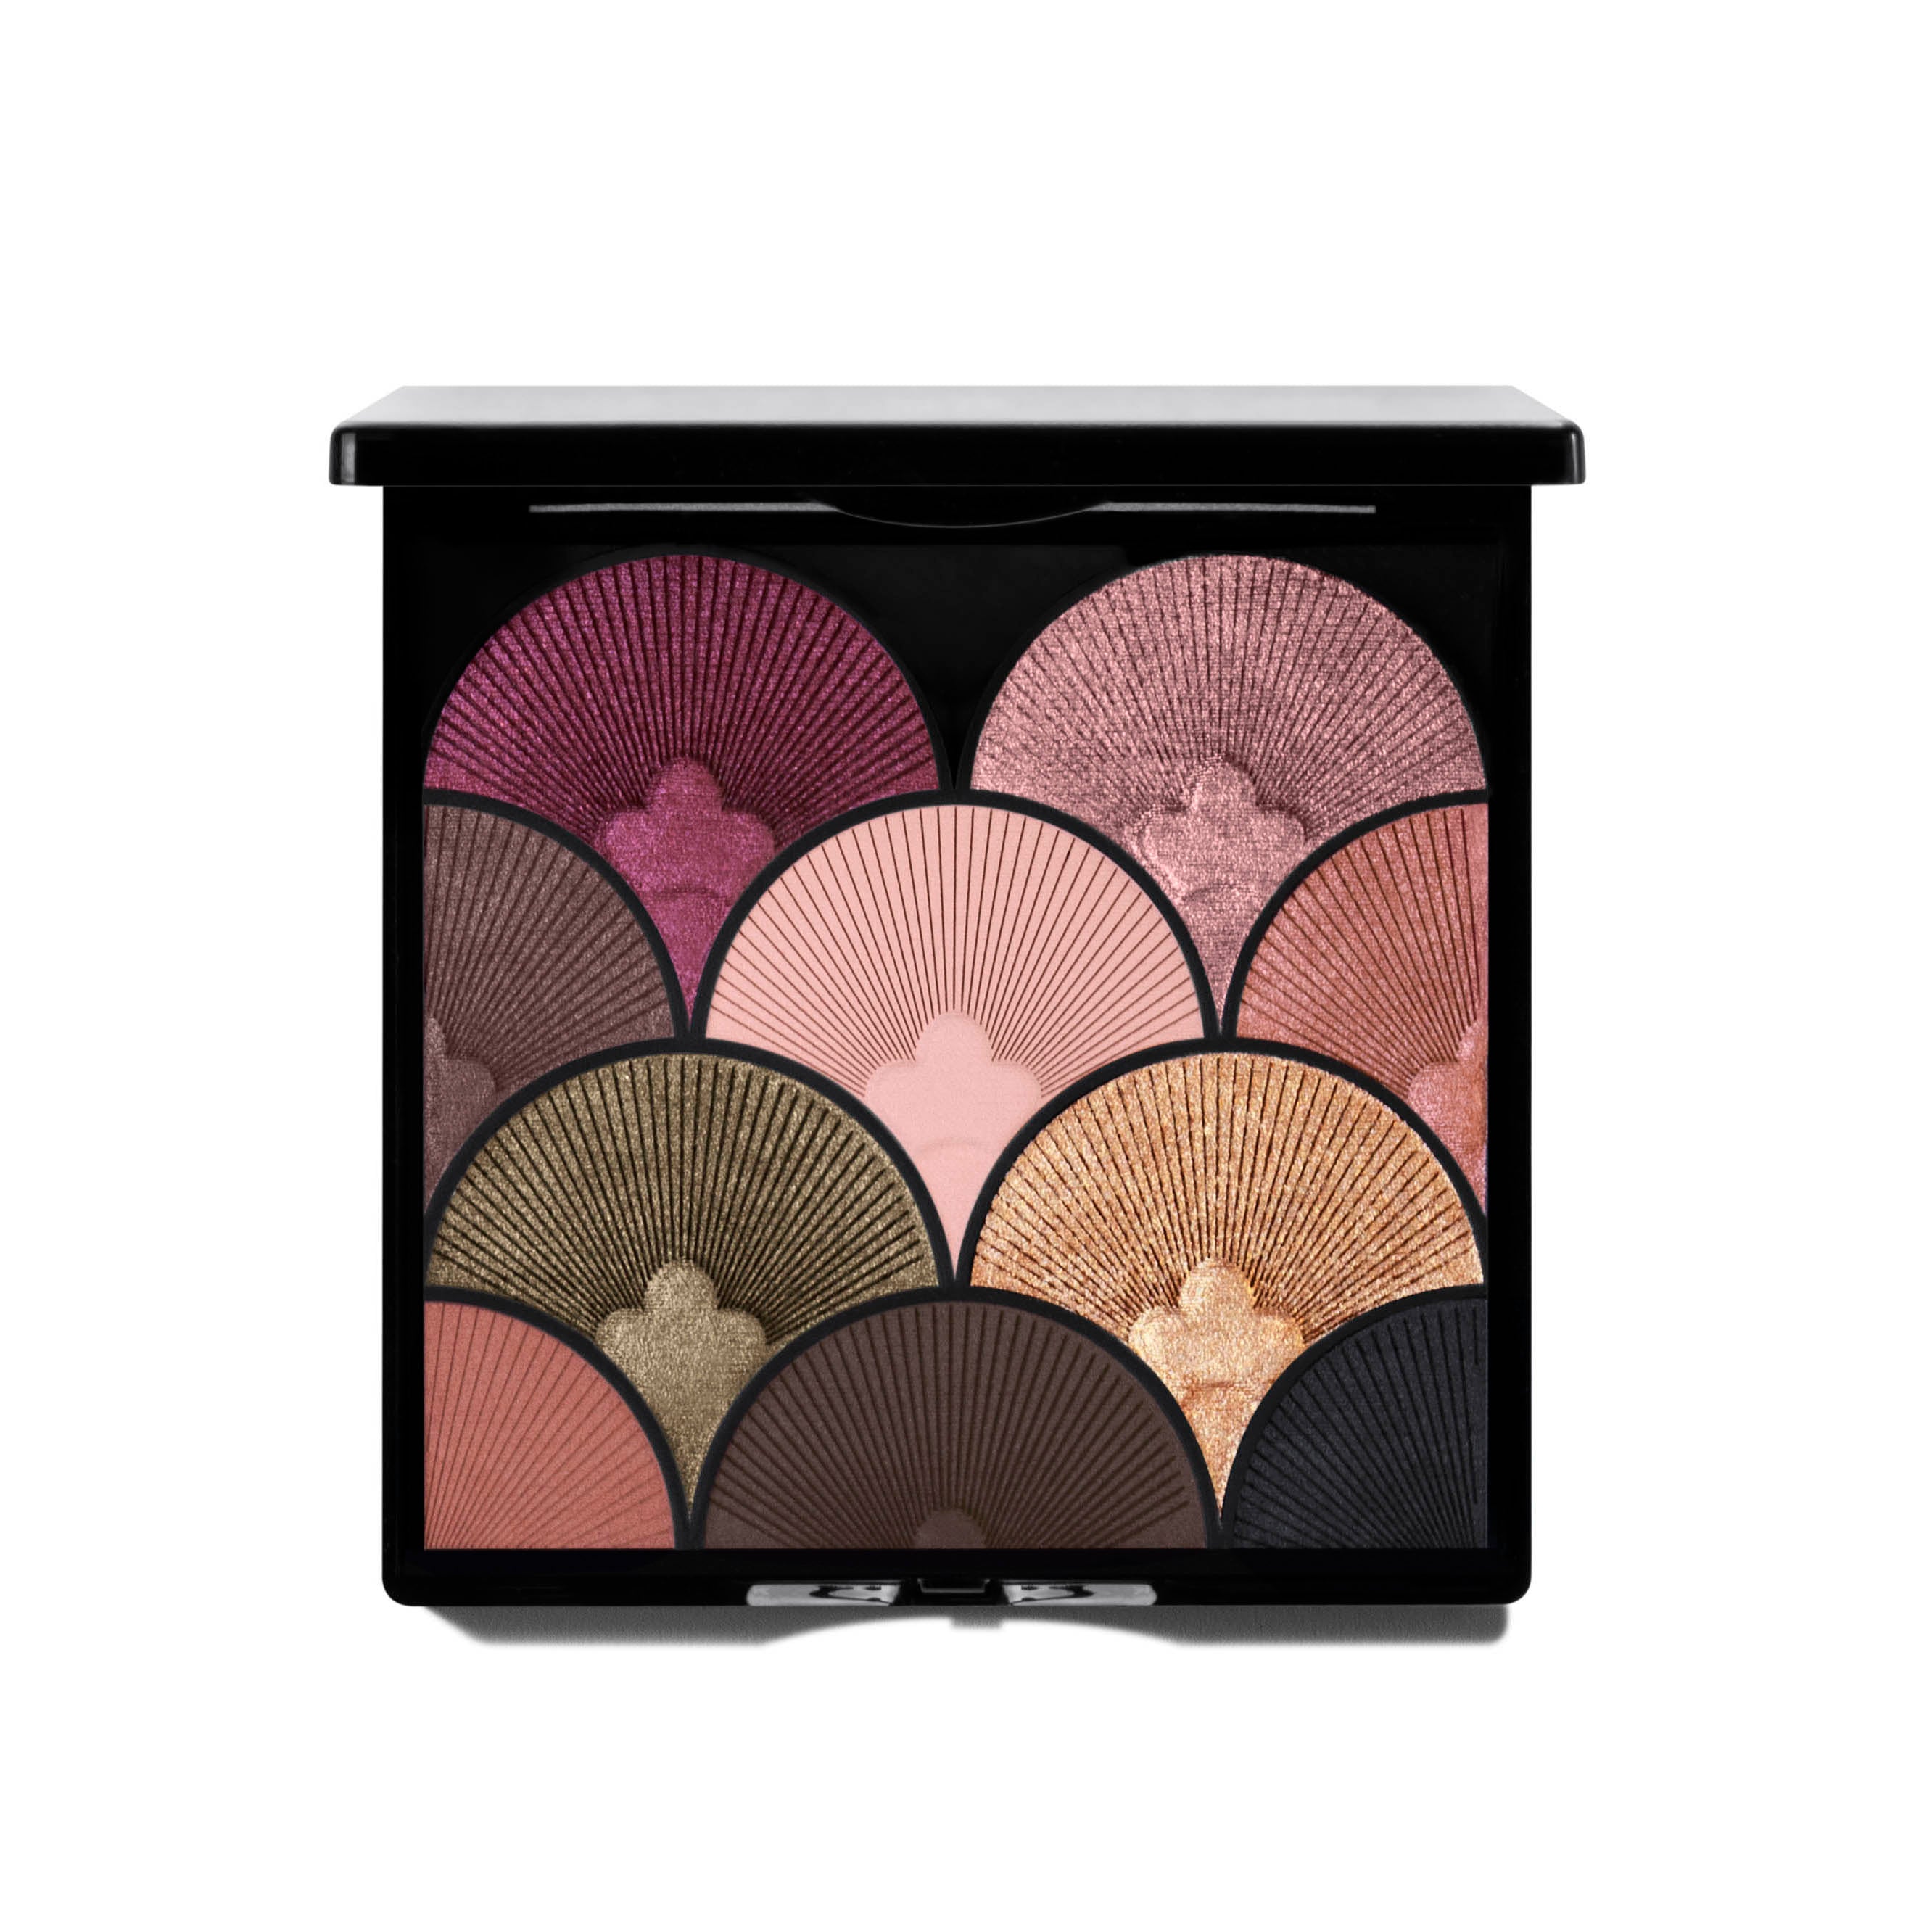 PALETTE EVENTAIL NUIT ETOILEE